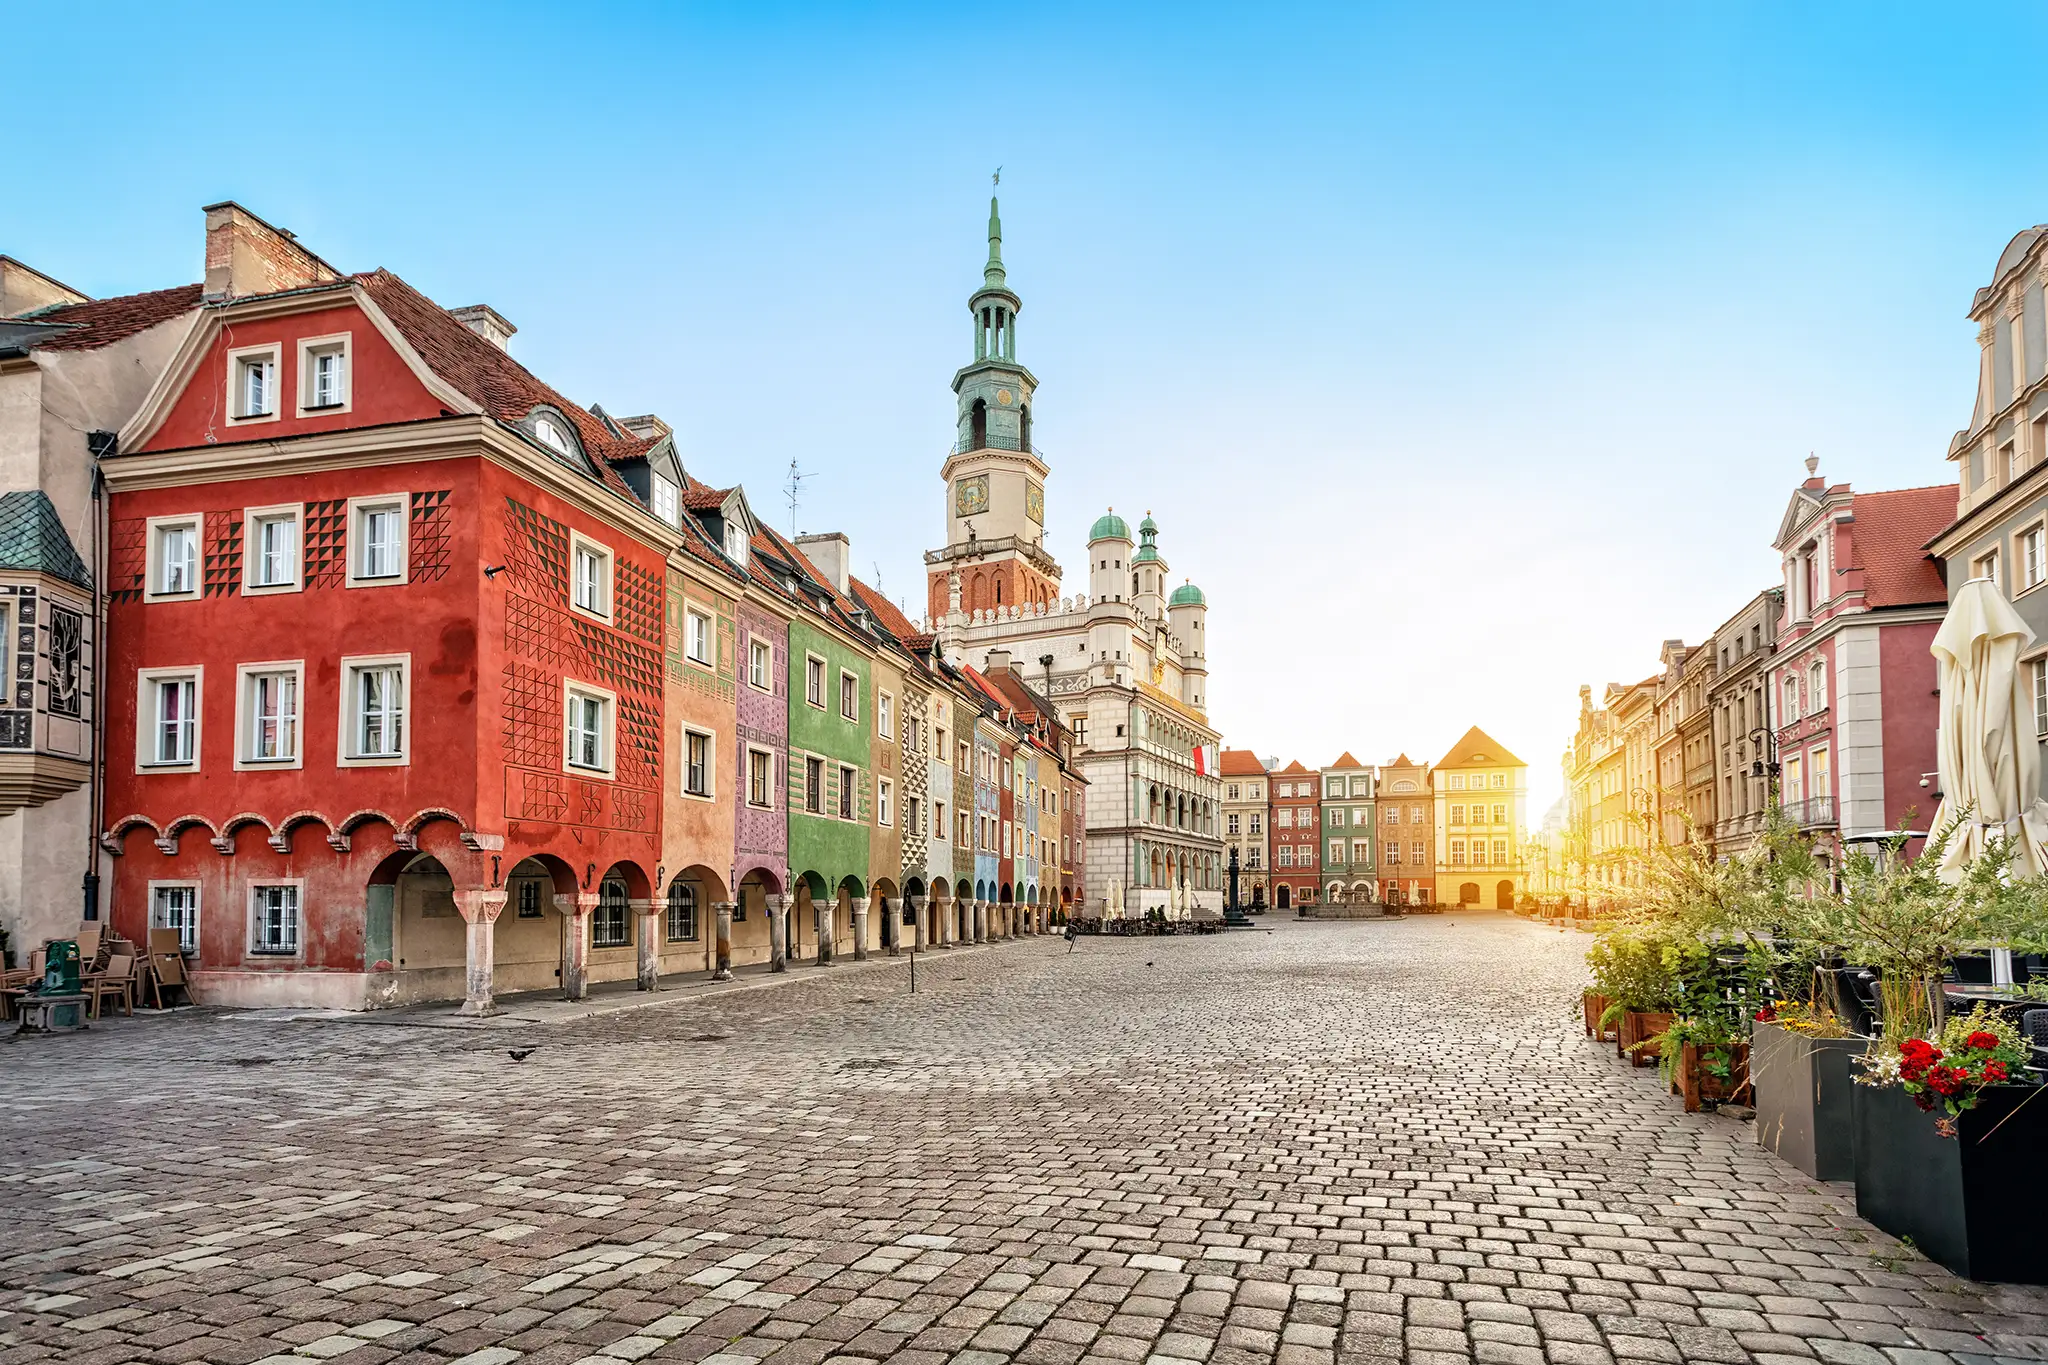 Stary Rynek square with small colorful houses and old Town Hall in Poznan, Poland.